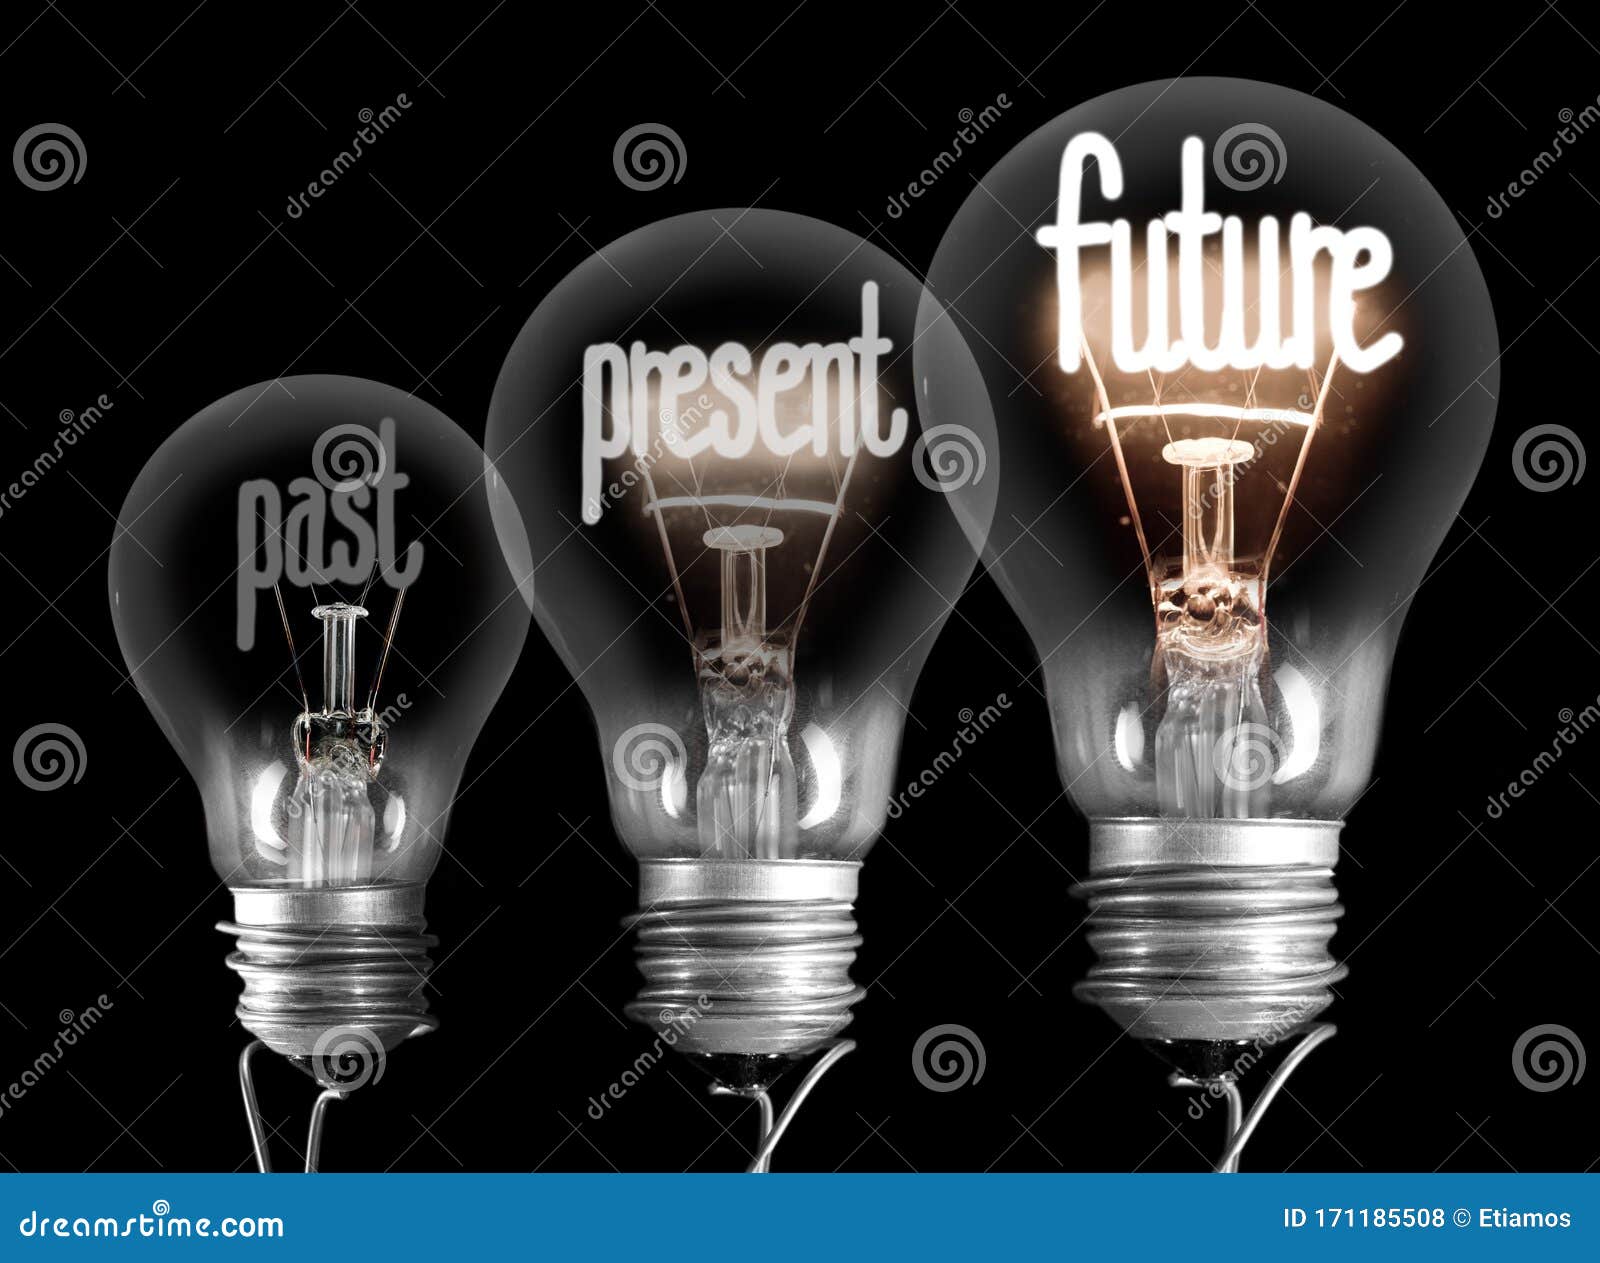 light bulbs with past, present and future concept